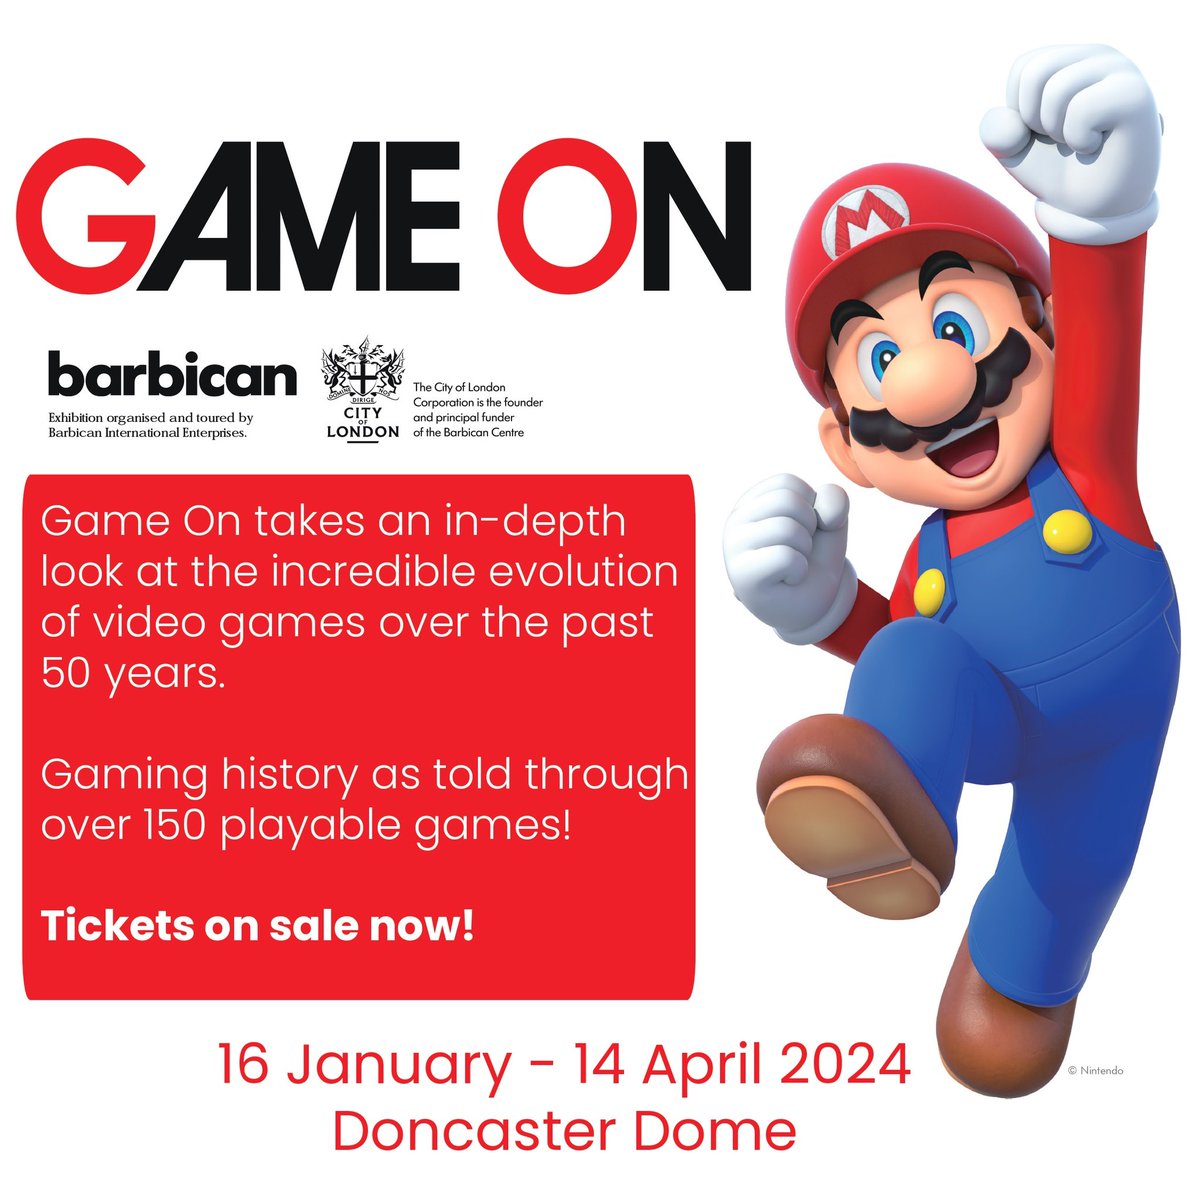 This large-scale international exhibition takes an in-depth look at the evolution of video games over the past 50 years & great for students from all key stages & disciplines & we’re offering a special educational offer price. Find out more: bit.ly/3RnvHmG